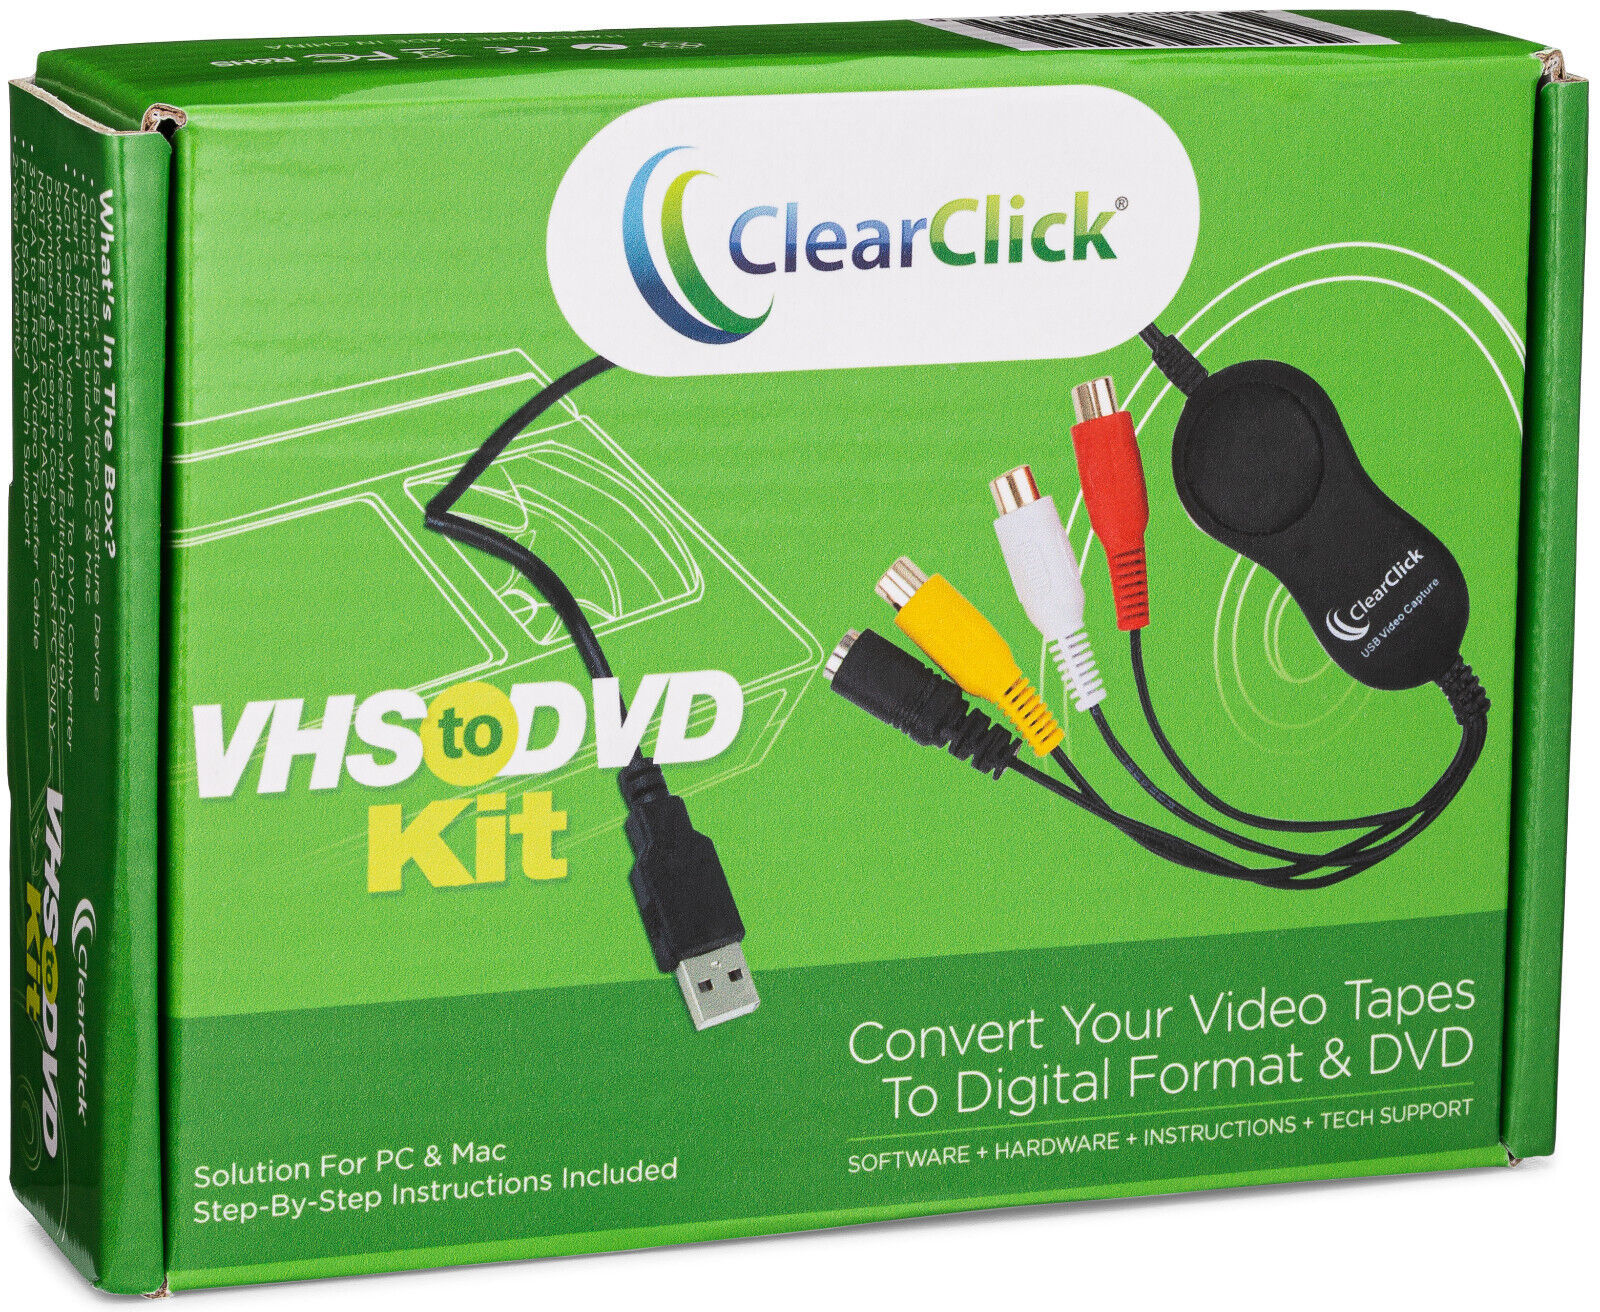 ClearClick VHS to DVD Kit for PC & Mac - USB Video Capture Device To Digital